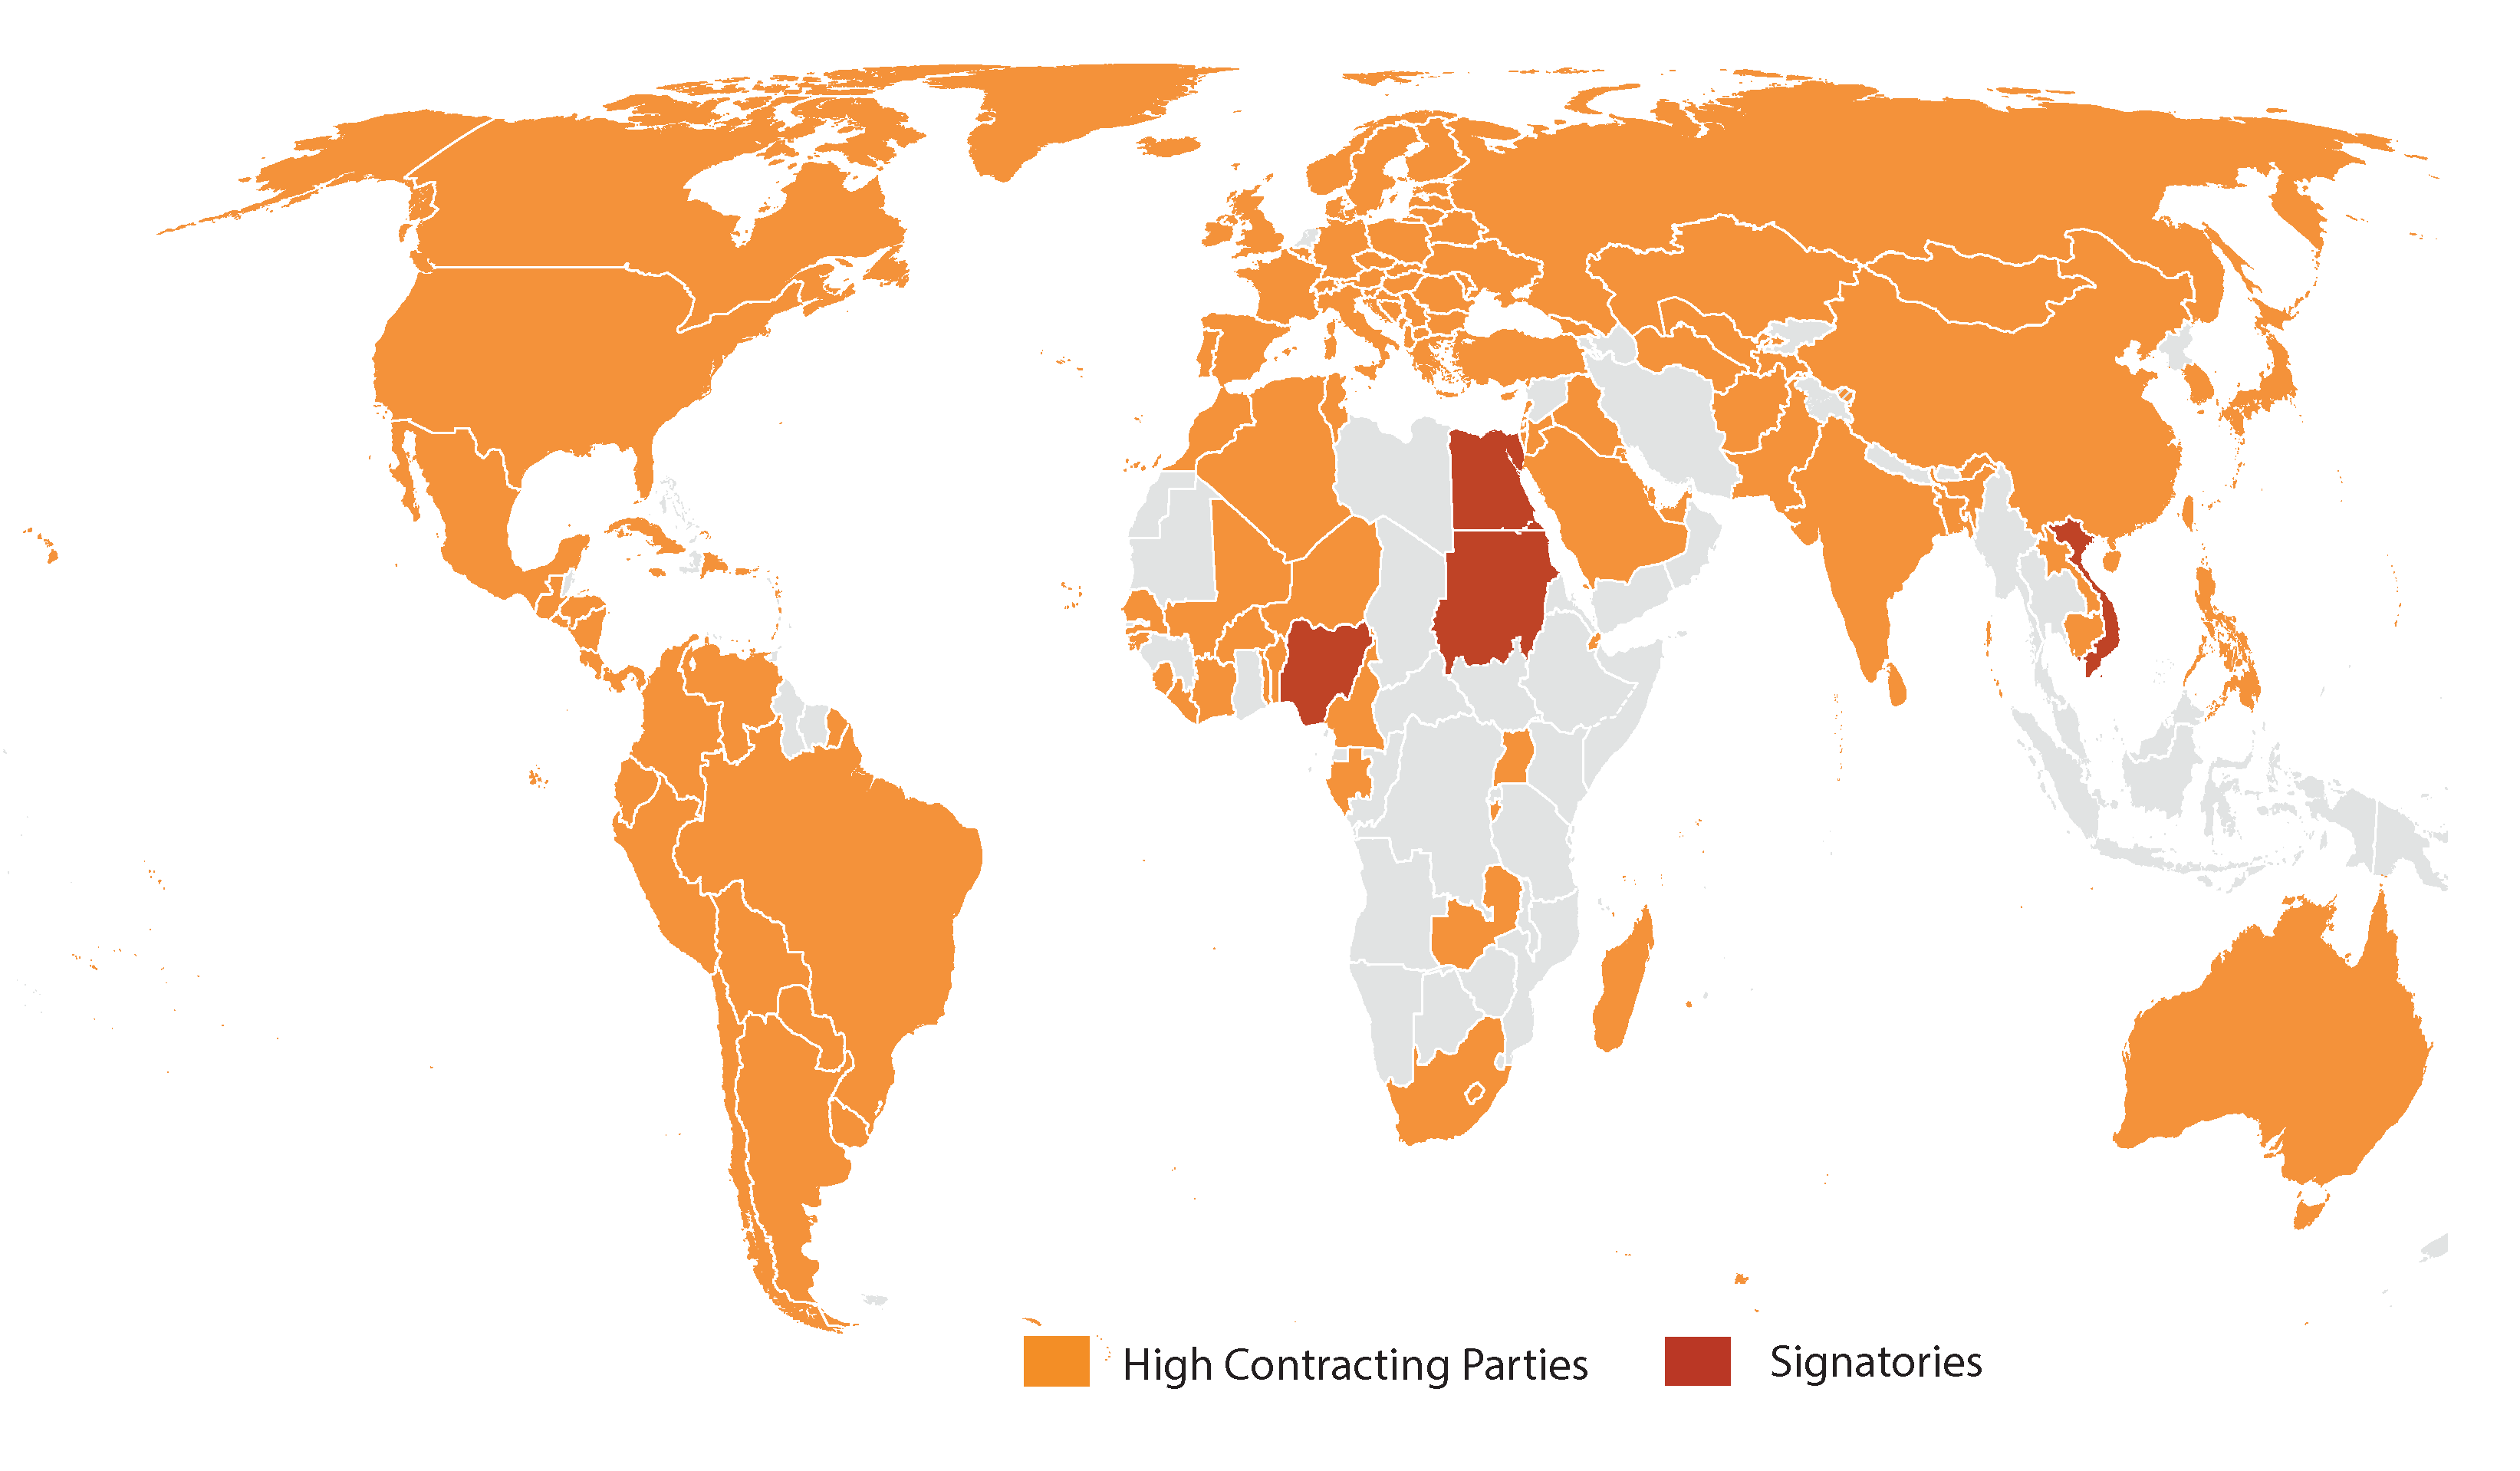 World map showing High Contracting Parties and signatory States